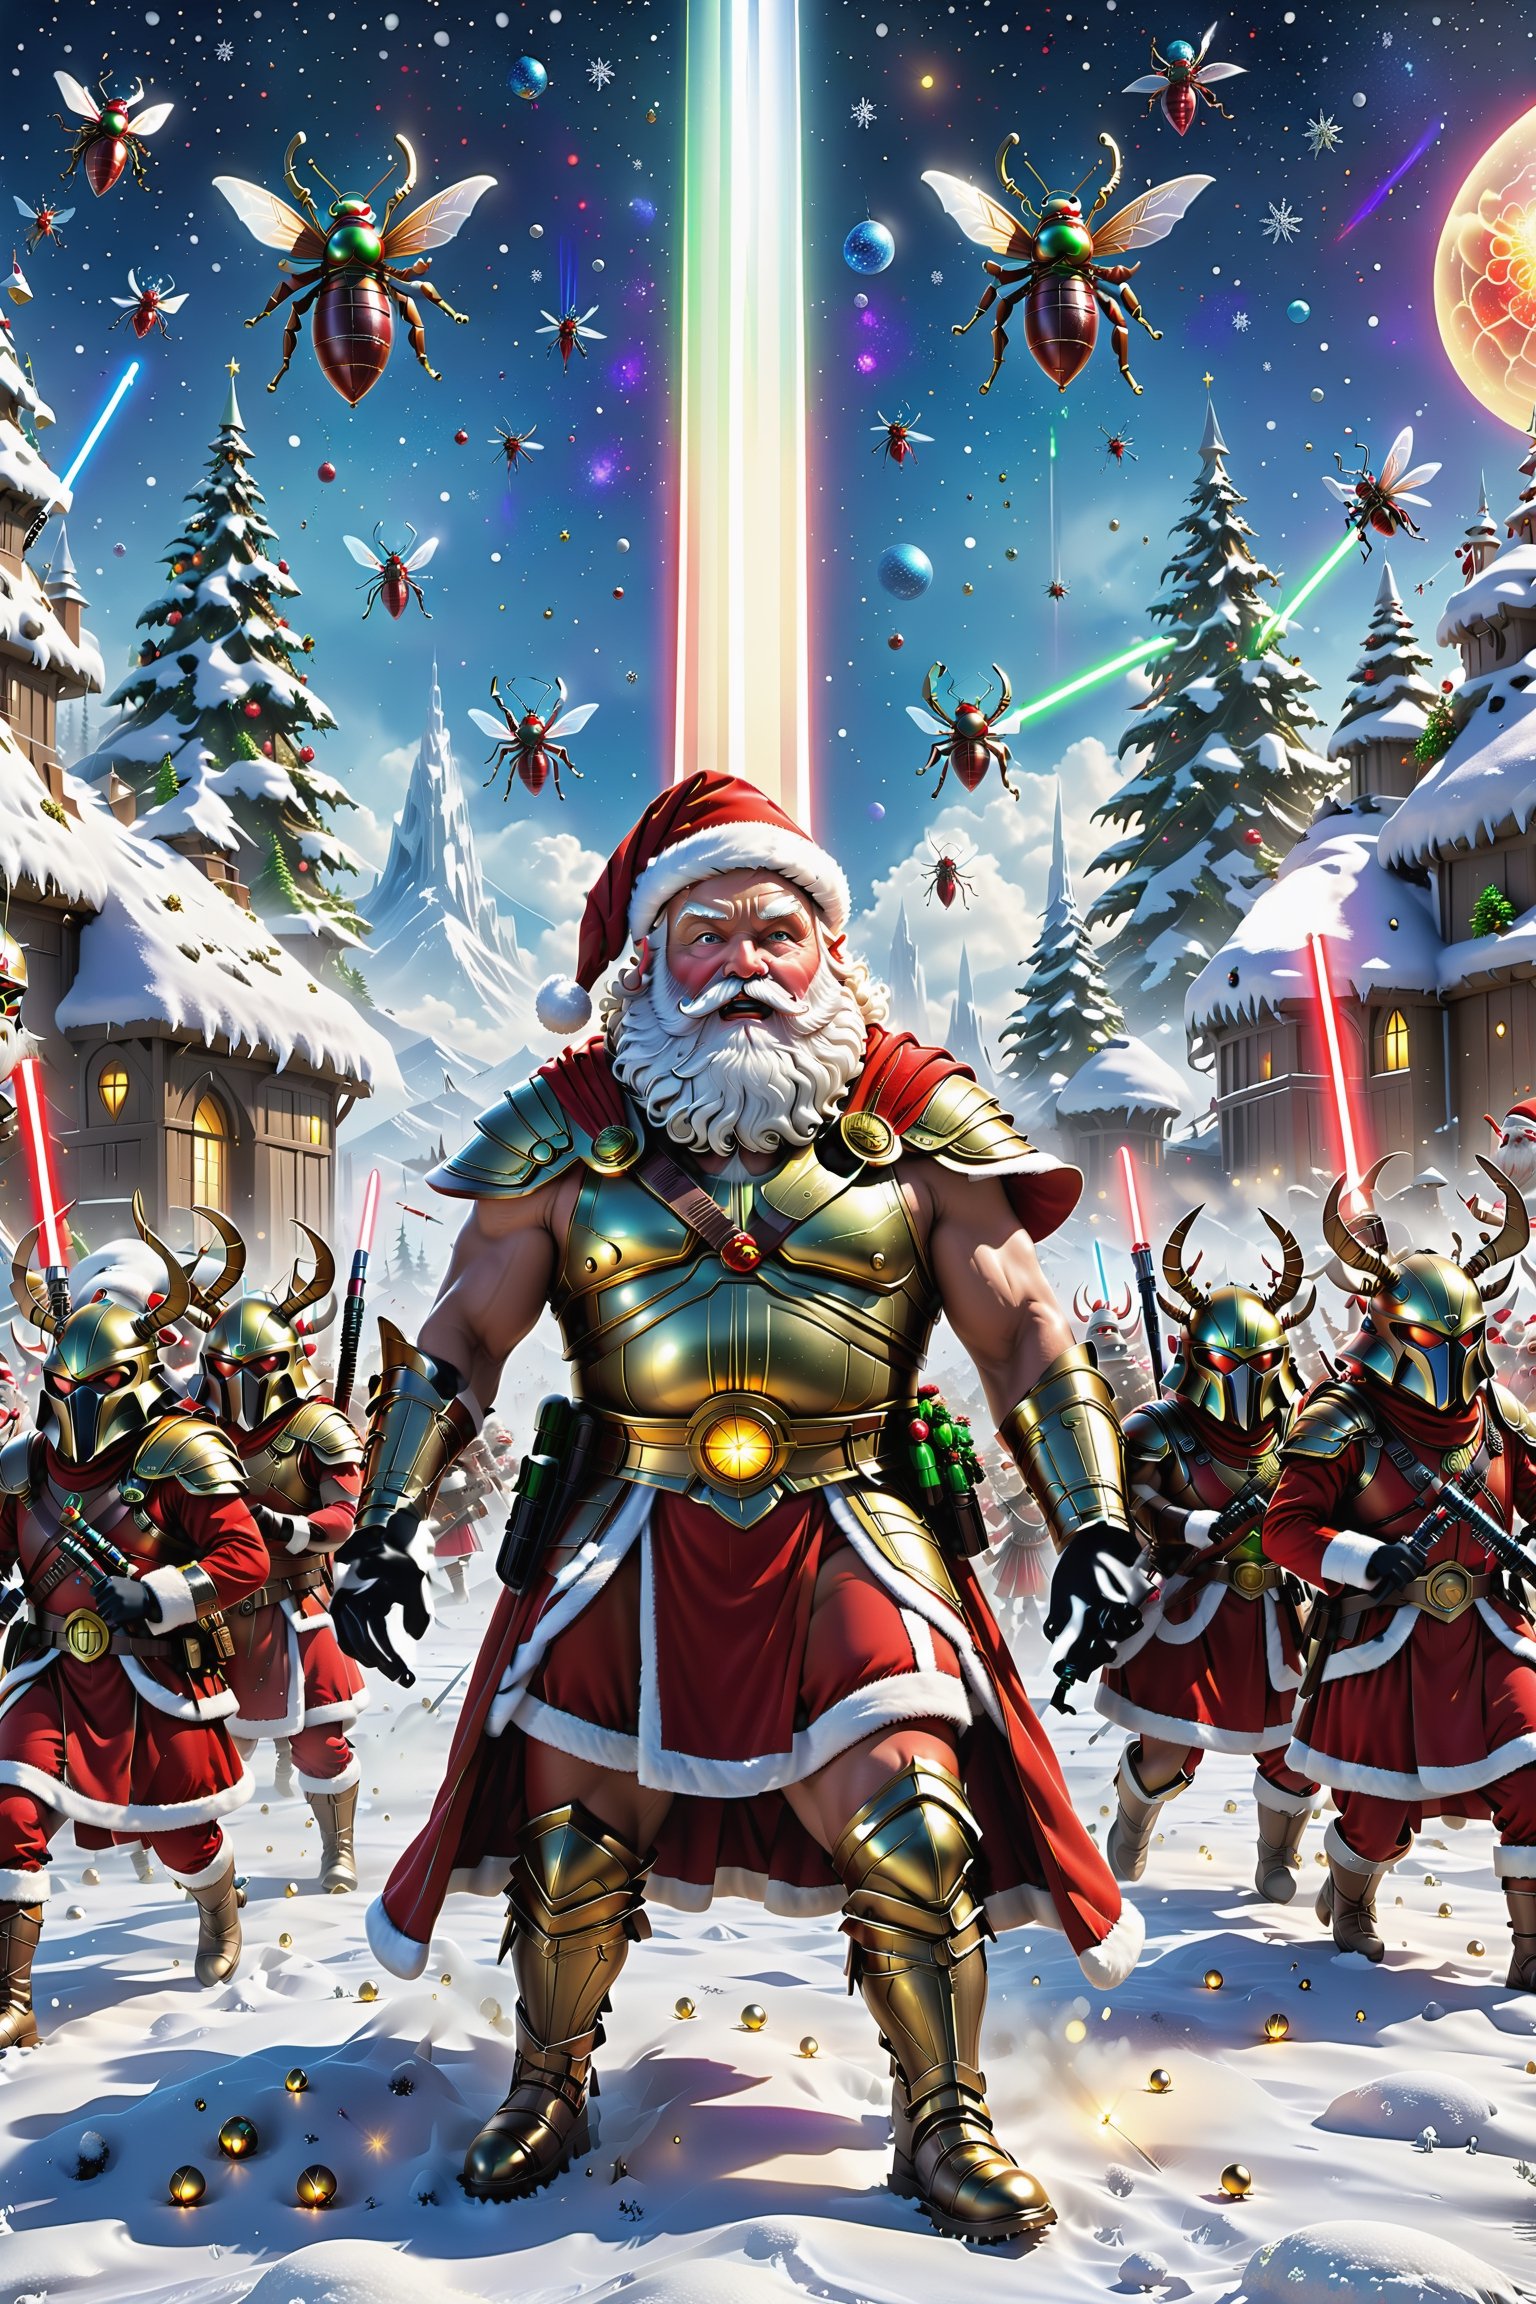 In this surreal scene, Santa Claus leads a huge army of Santas in a fierce battle against alien bugs. The whole picture is full of thrilling atmosphere, combining traditional Christmas elements with sci-fi adventure.

The sky is dotted with stars, and a group of alien bugs fly like a galaxy, their appearance smooth, transparent, with an unknown sense of technology. The Santa Claus army, on the other hand, wears gorgeous battle costumes and is equipped with unique weapons, such as Christmas gift-turned lightsabers and candy bombs. Each Santa displays a valiant stance for battle, with a determined expression on his face.

The snow is covered with fragile white snow, and on the snow is a fierce encounter. Santa's legion of sleighs converted into battle armor and adorned with colored lights and decorations, there is a fierce duel between the Santa Claus and the alien bugs. Santa wields a lightsaber, a magnificent ray of light streaking across the night sky, contrasting sharply with the glow of the alien bugs.

In this whimsical scene, Santa Claus is no longer a traditional gift-giver, but a valiant warrior, guarding the mysterious power of Christmas with Santa's legion against the invasion of the alien bugs. The whole picture is full of fantasy and creativity, giving a brand new Christmas experience.